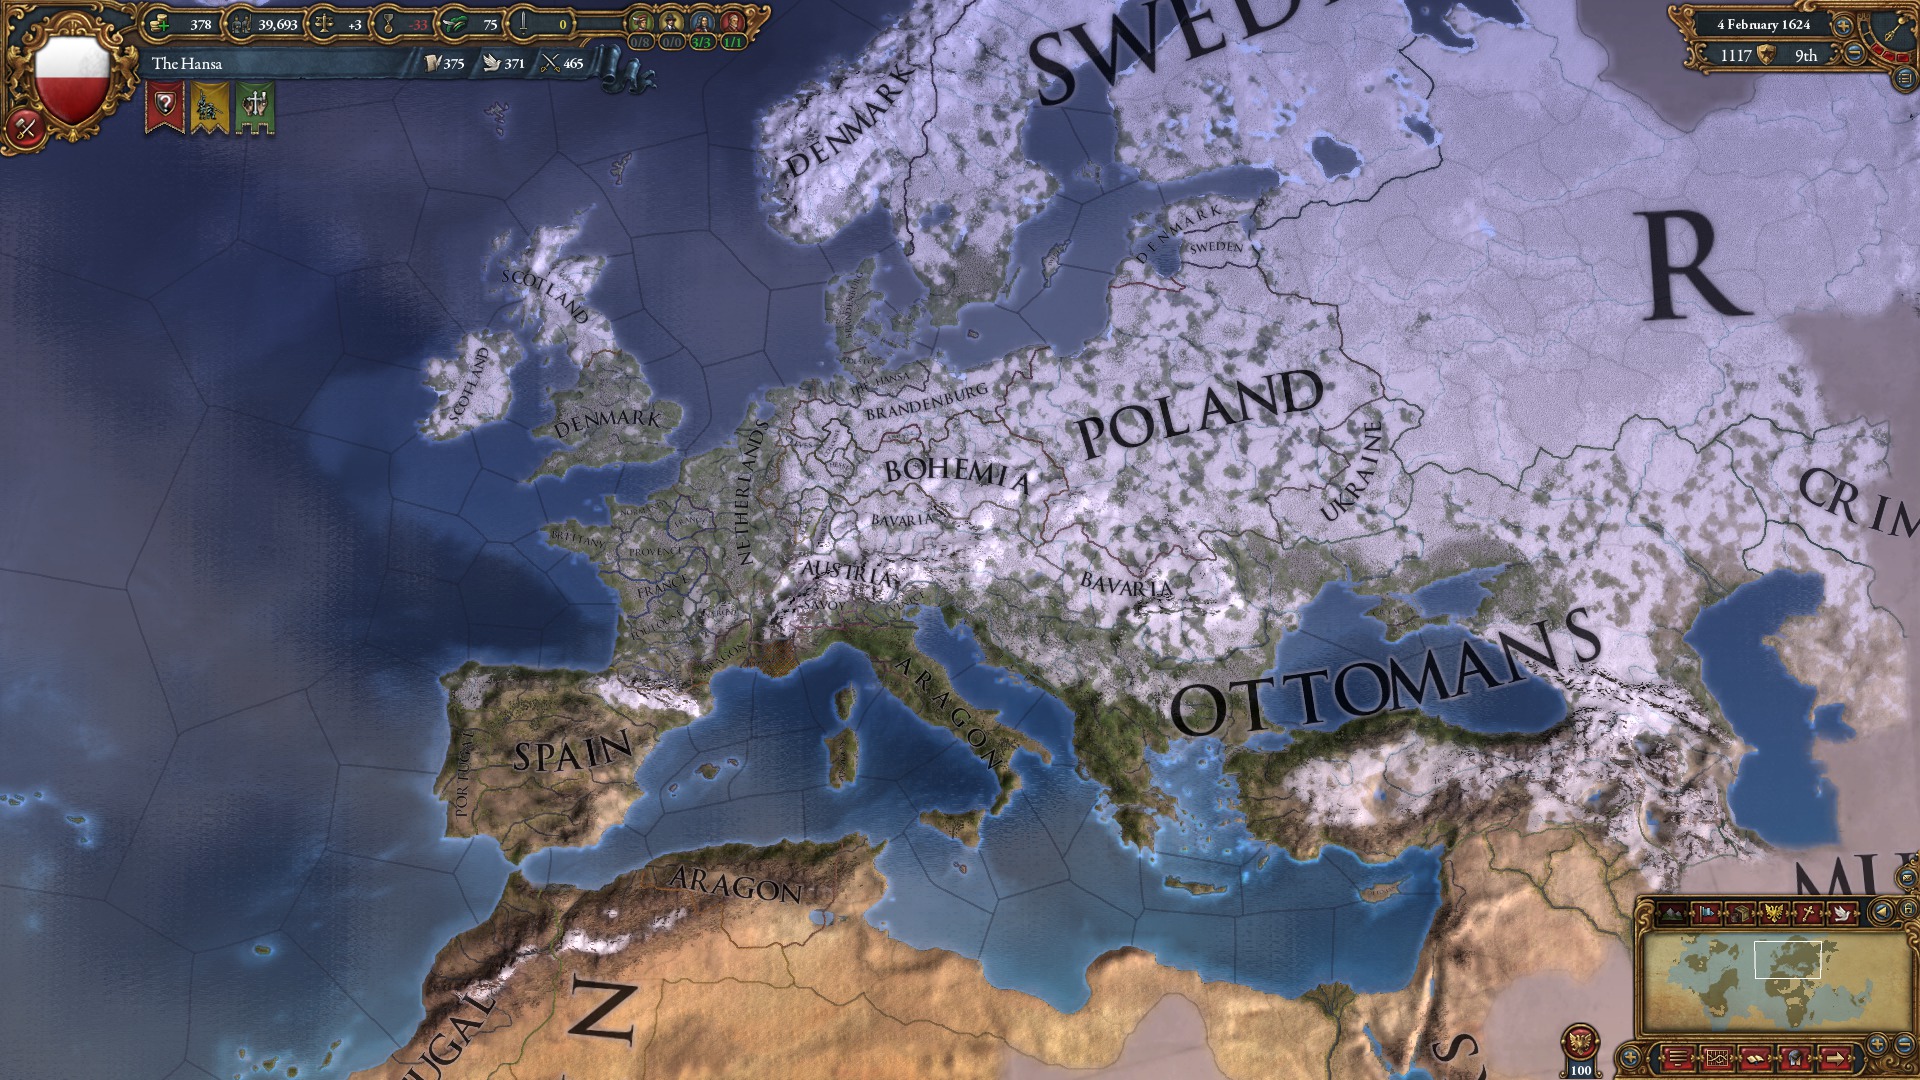 Europa Universalis IV: Trade Nations Unit Pack Featured Screenshot #1